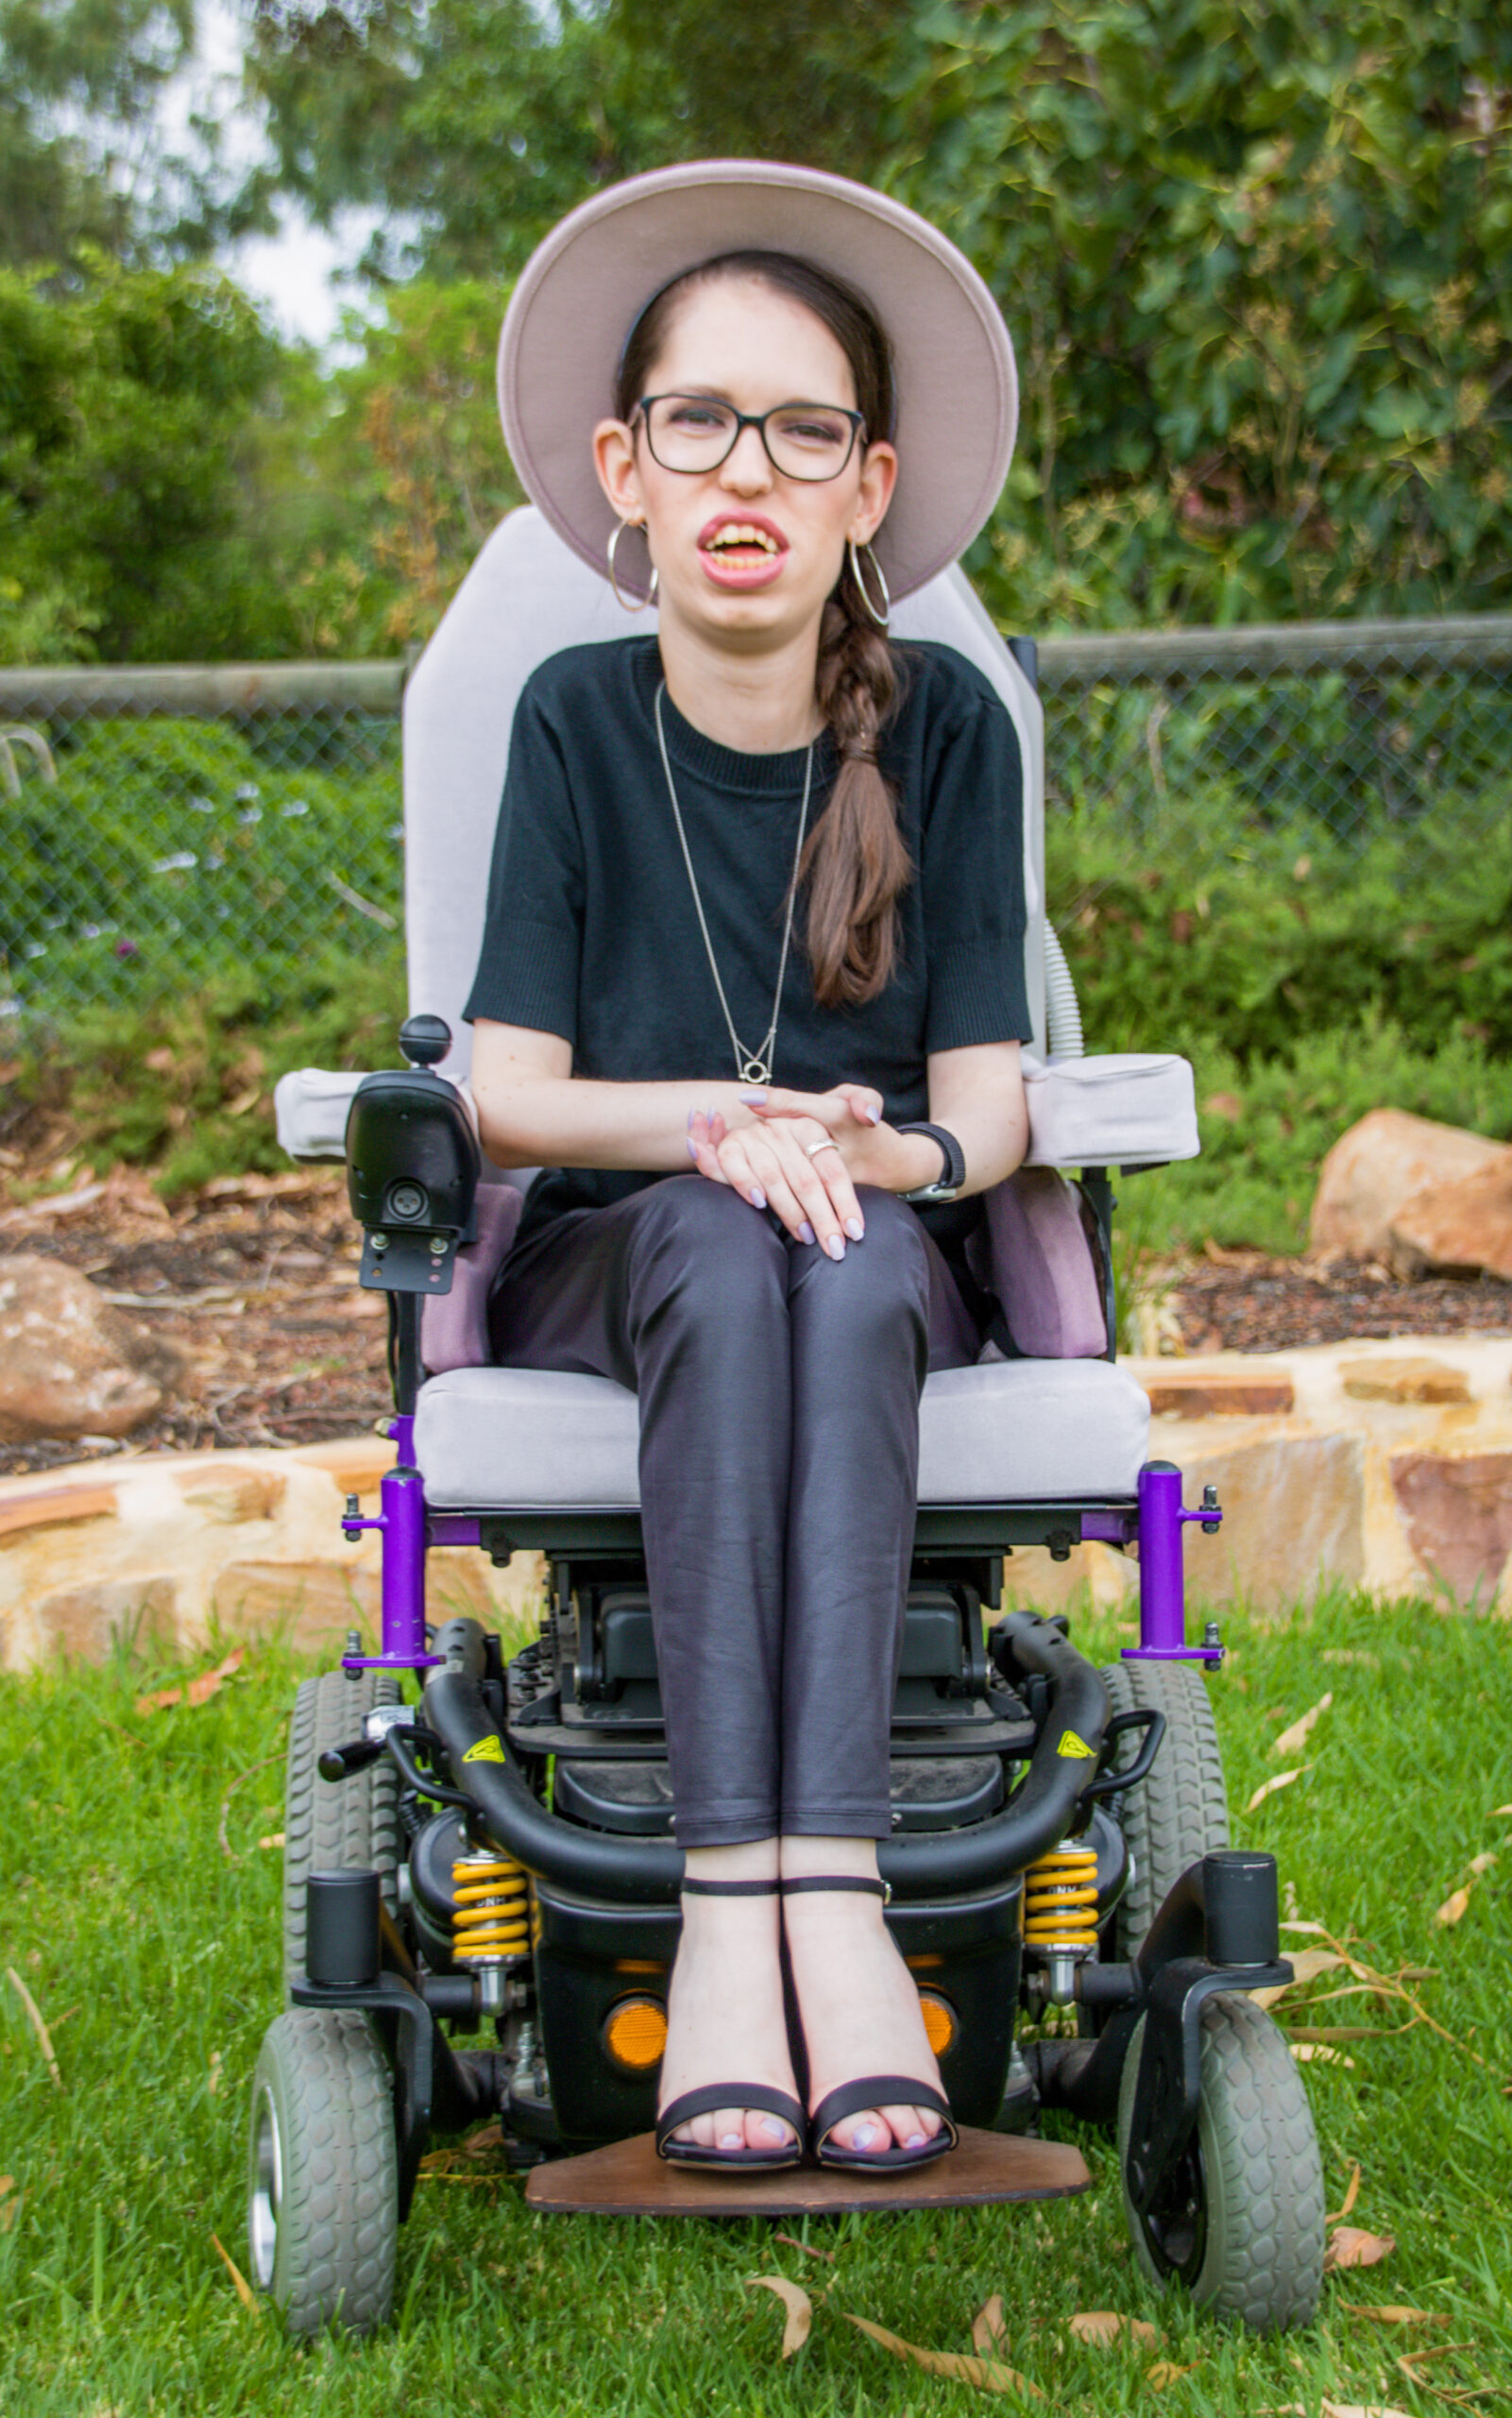 Amy is sitting in her wheelchair in a garden setting. She is wearing a purple felt hat, black knit top, leather pants and black high heels.